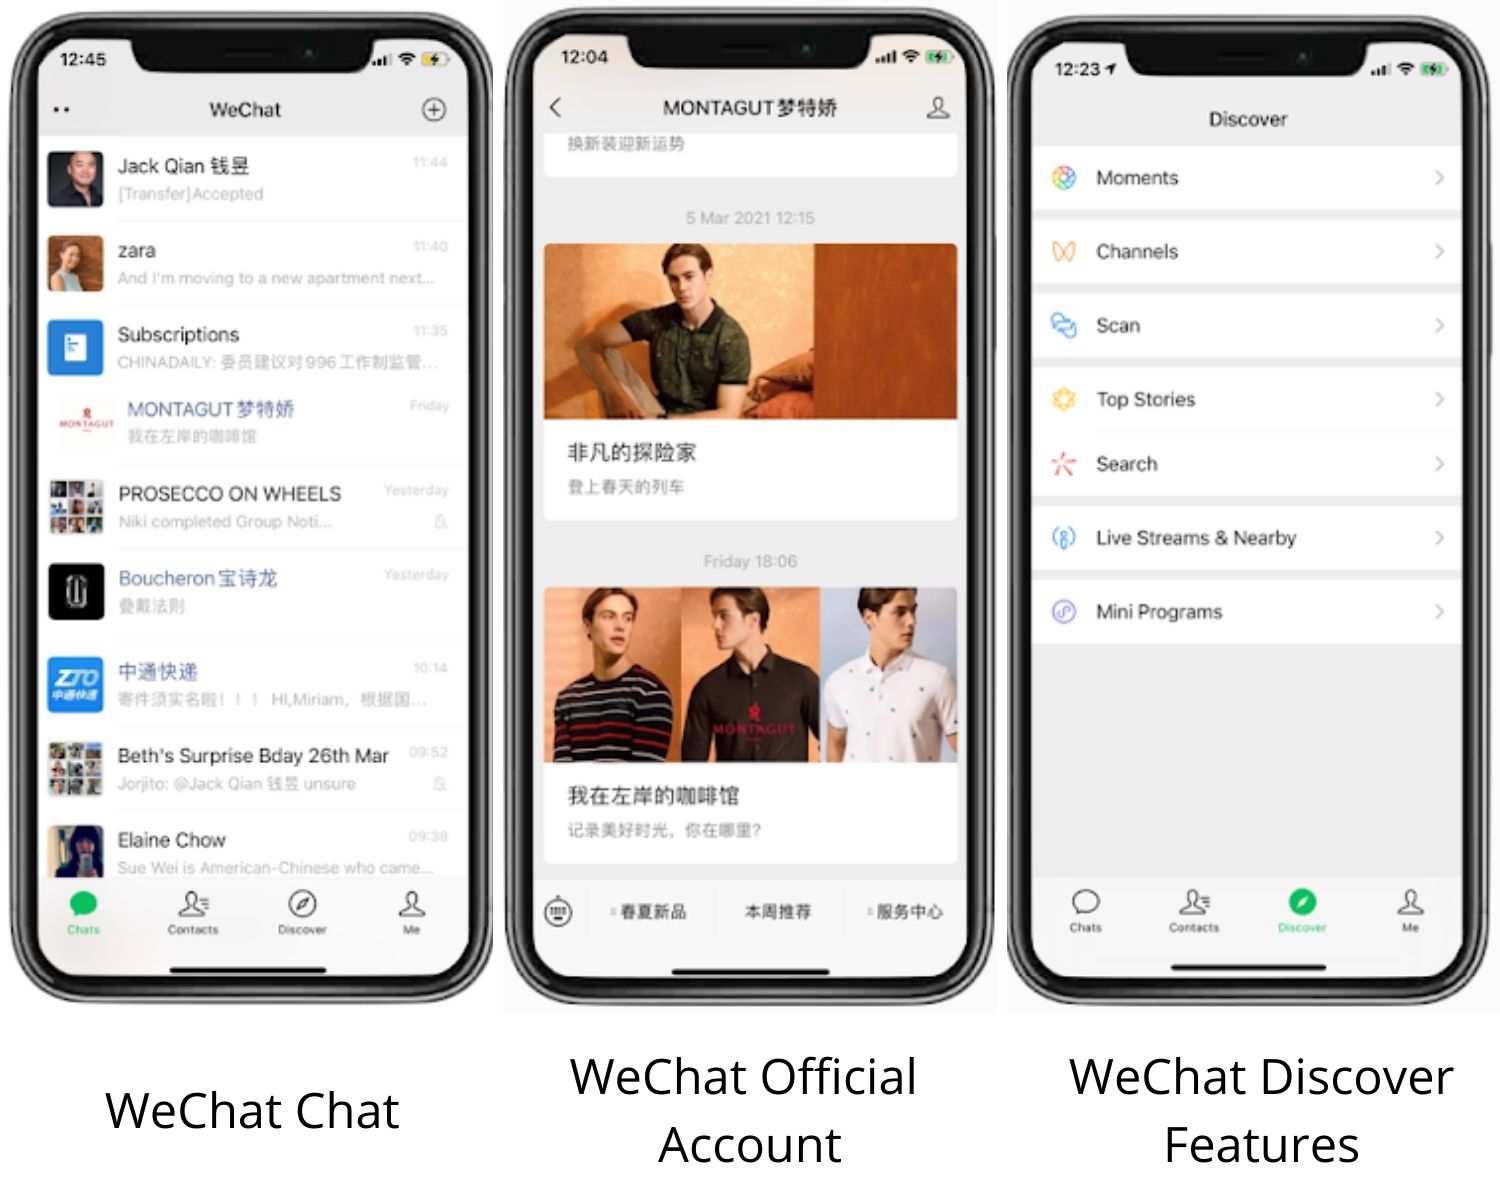 The Top 5 WeChat mini games – A simple guide to building the best